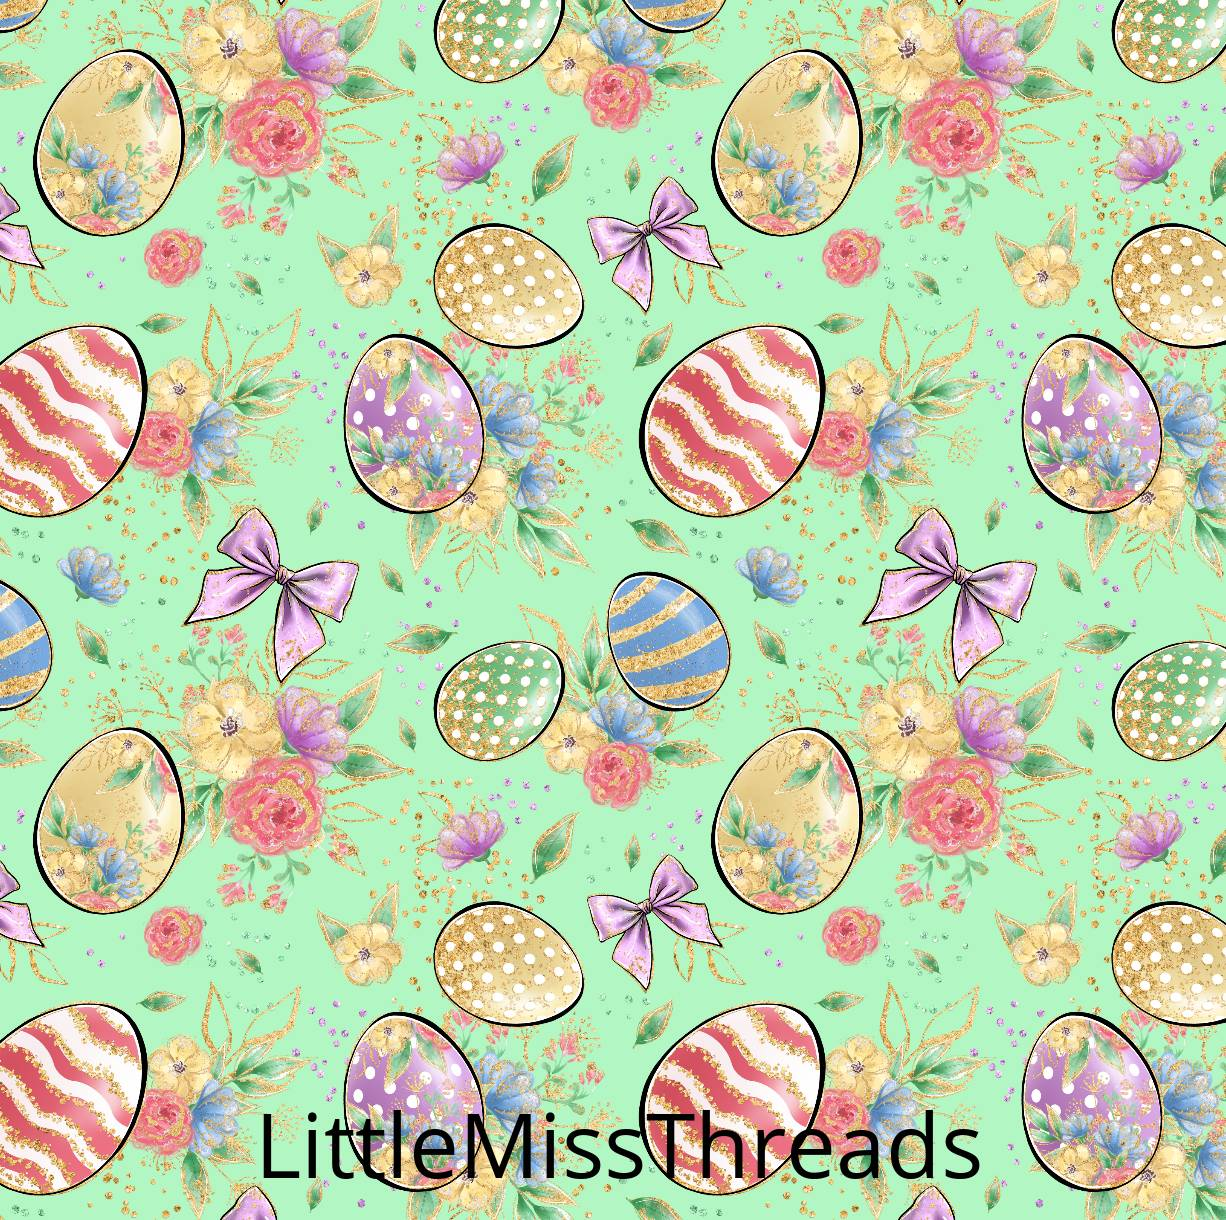 PRE ORDER - Bunny Fun Green - Fabric - Fabric from [store] by Little Miss Threads - 